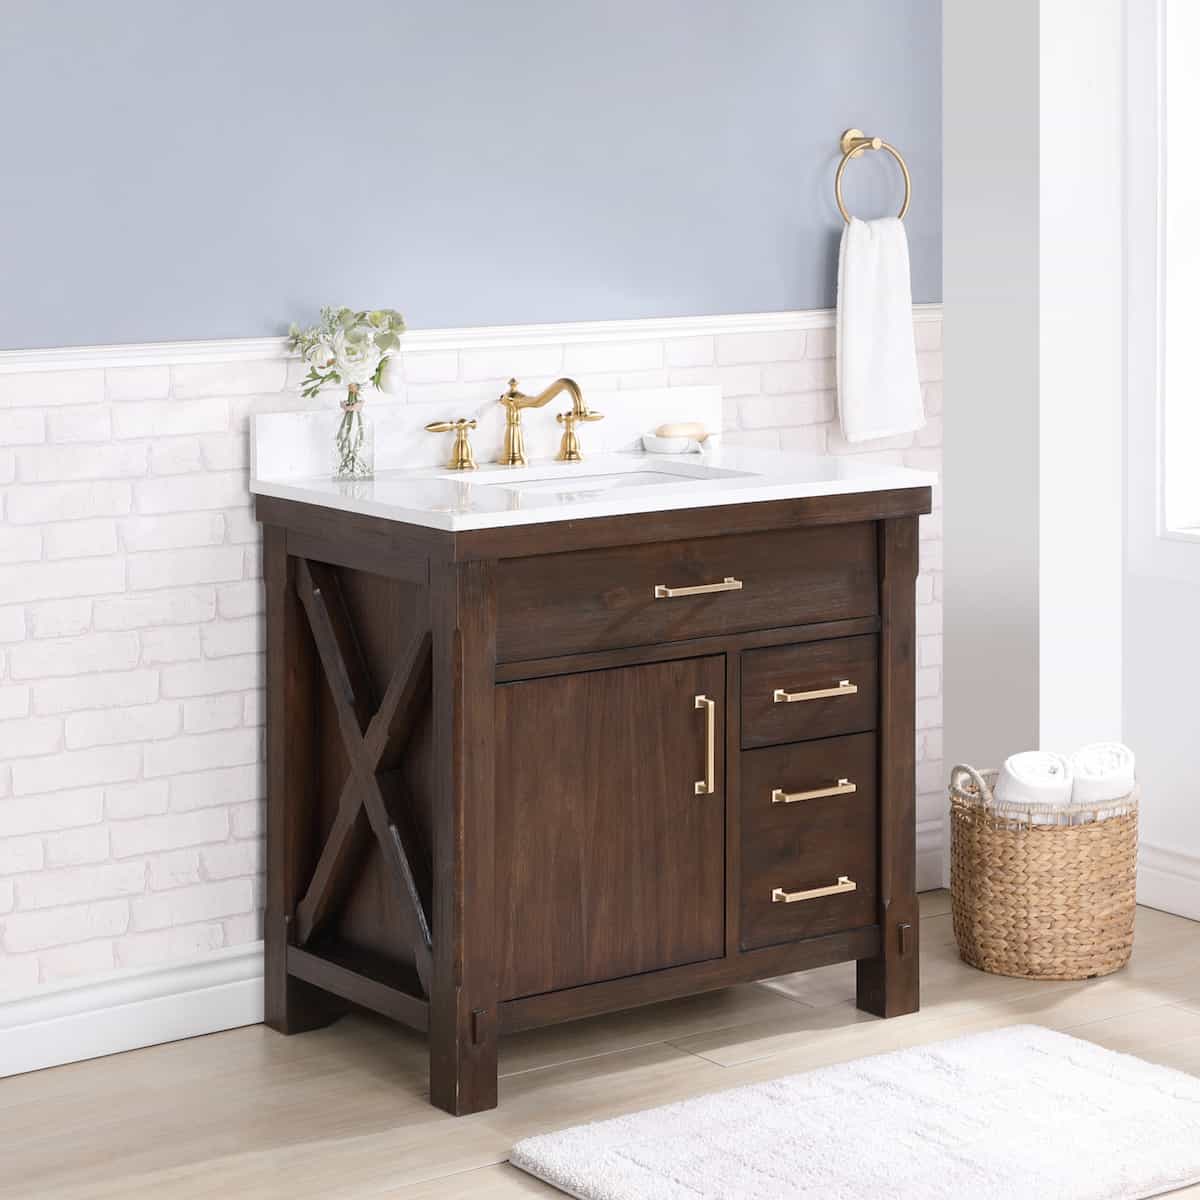 Vinnova Viella 36 Inch Freestanding Single Sink Bath Vanity in Deep Walnut Finish with White Composite Countertop Without Mirror Side 701836-DW-WS-NM